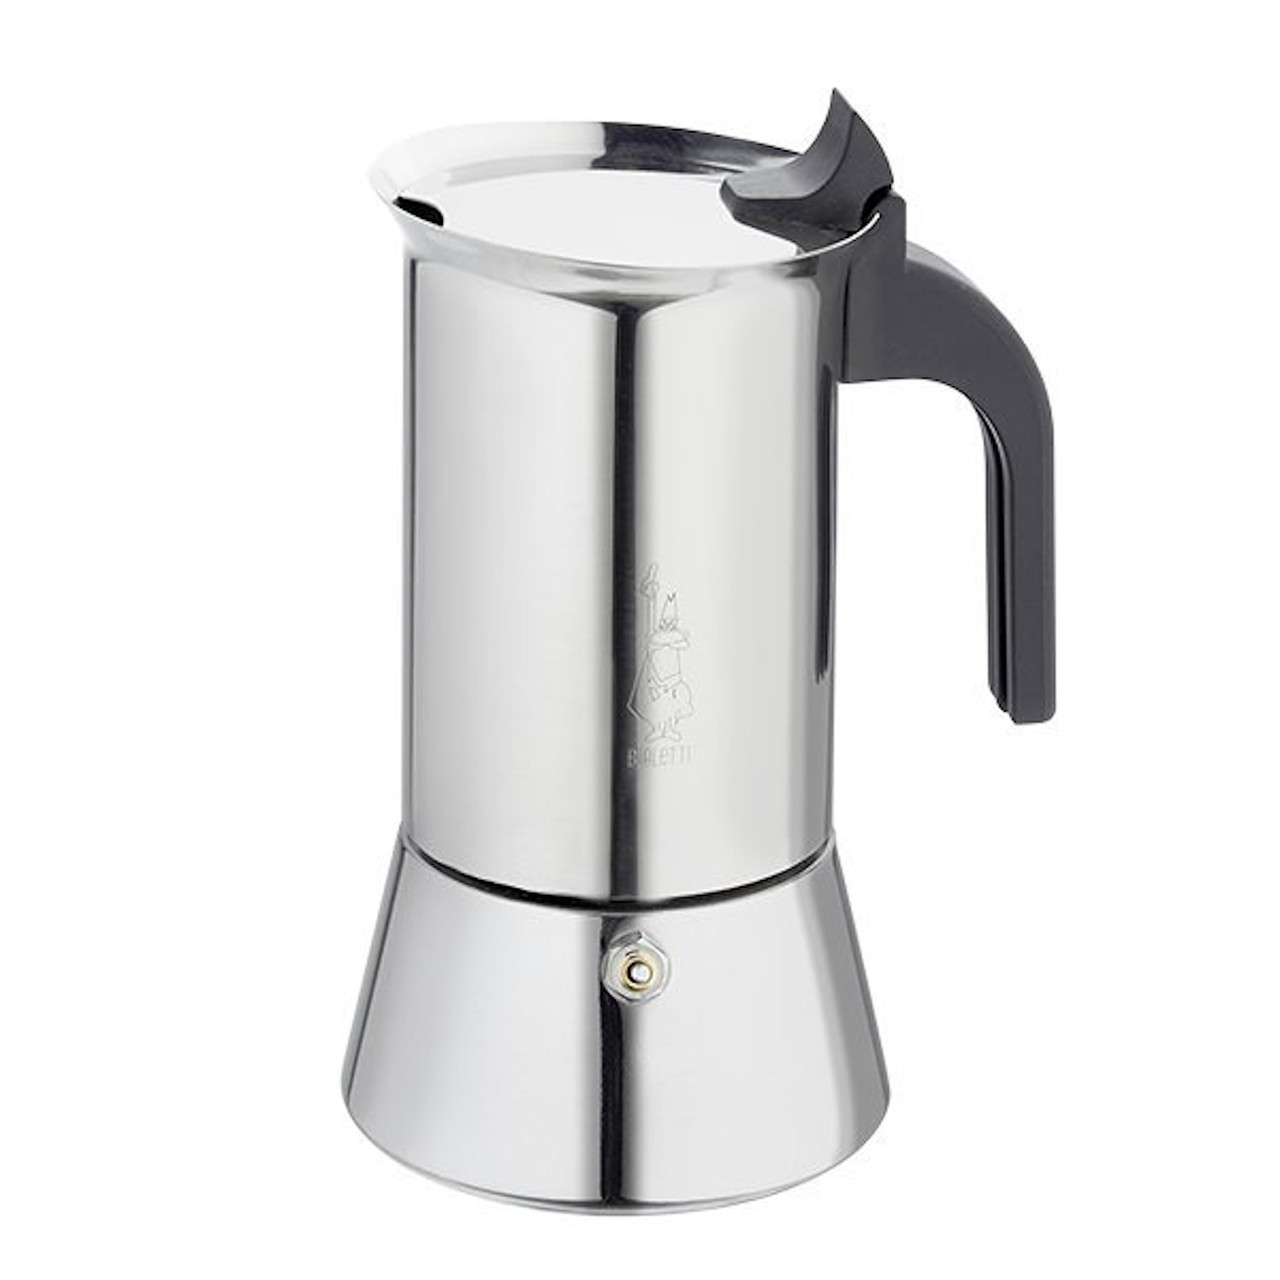 Bialetti New Venus Induction, Stovetop Coffee Maker, 18/10 Steel, 6-Cup  Espresso, suitable for all types of hobs 